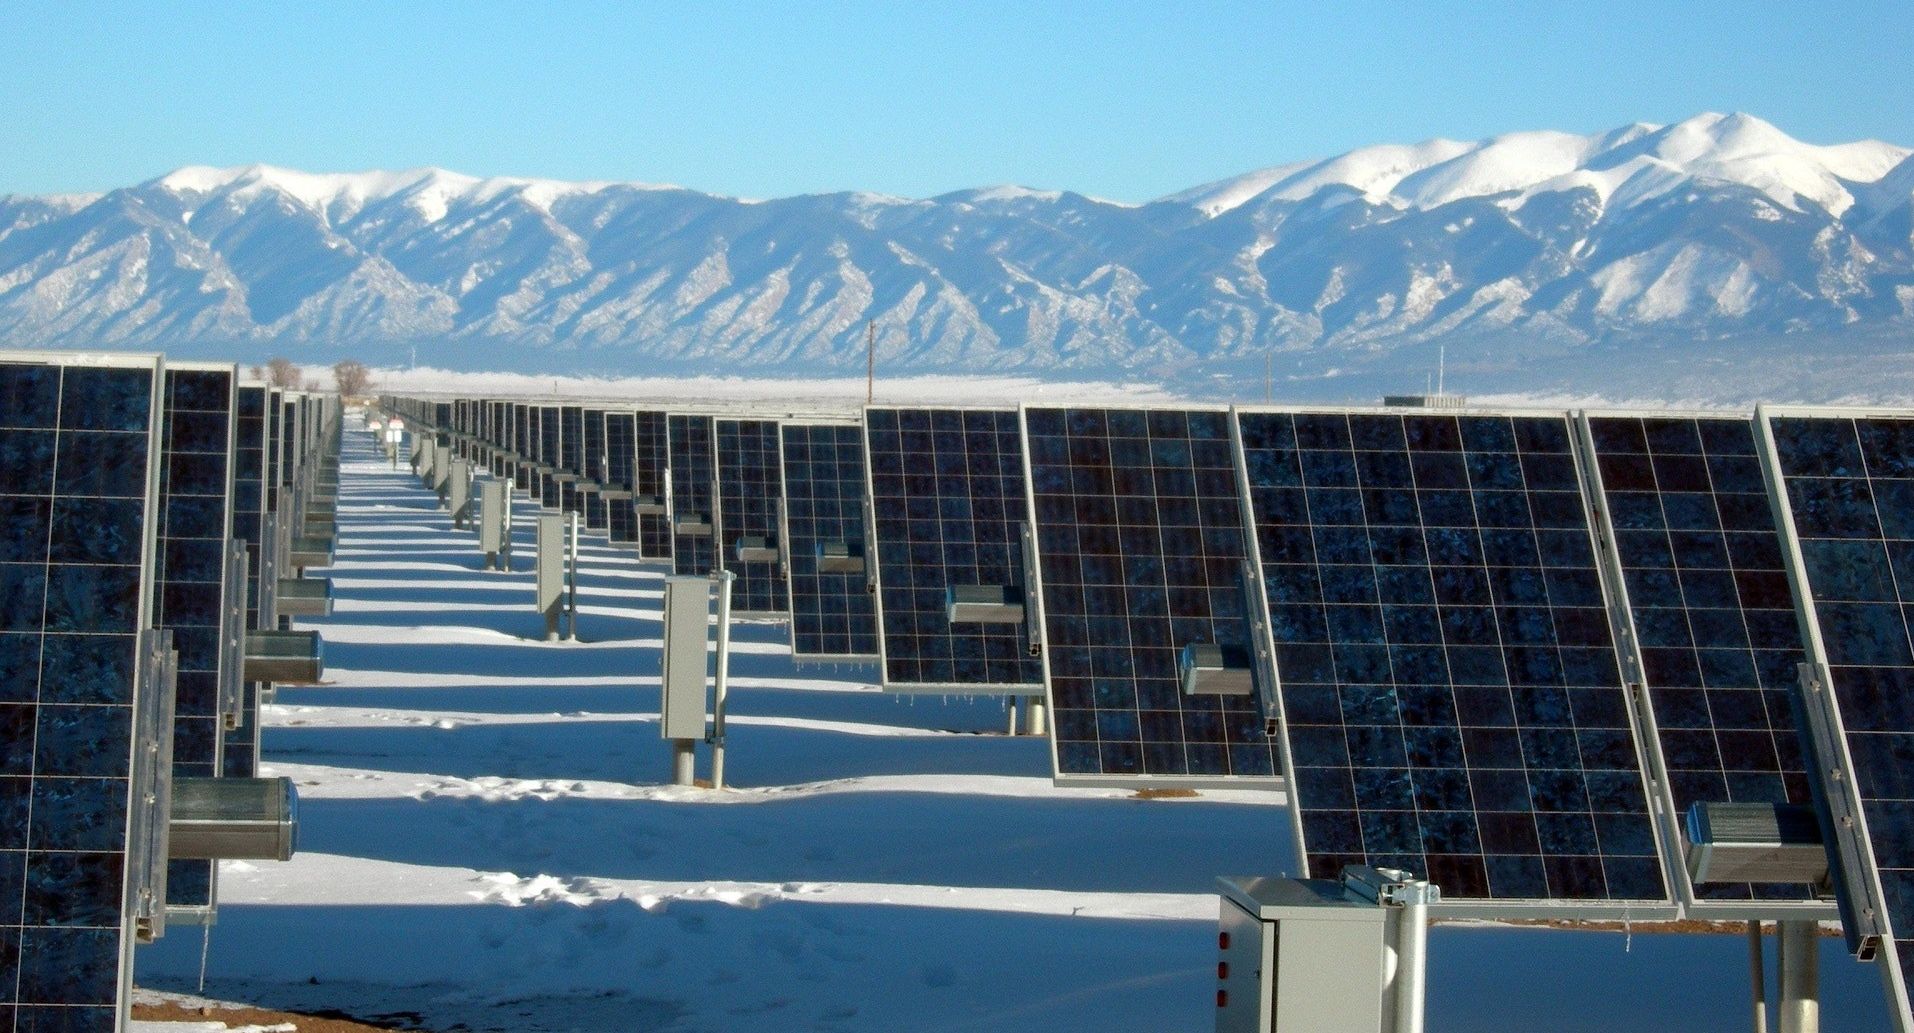 solar panels in front of mountains